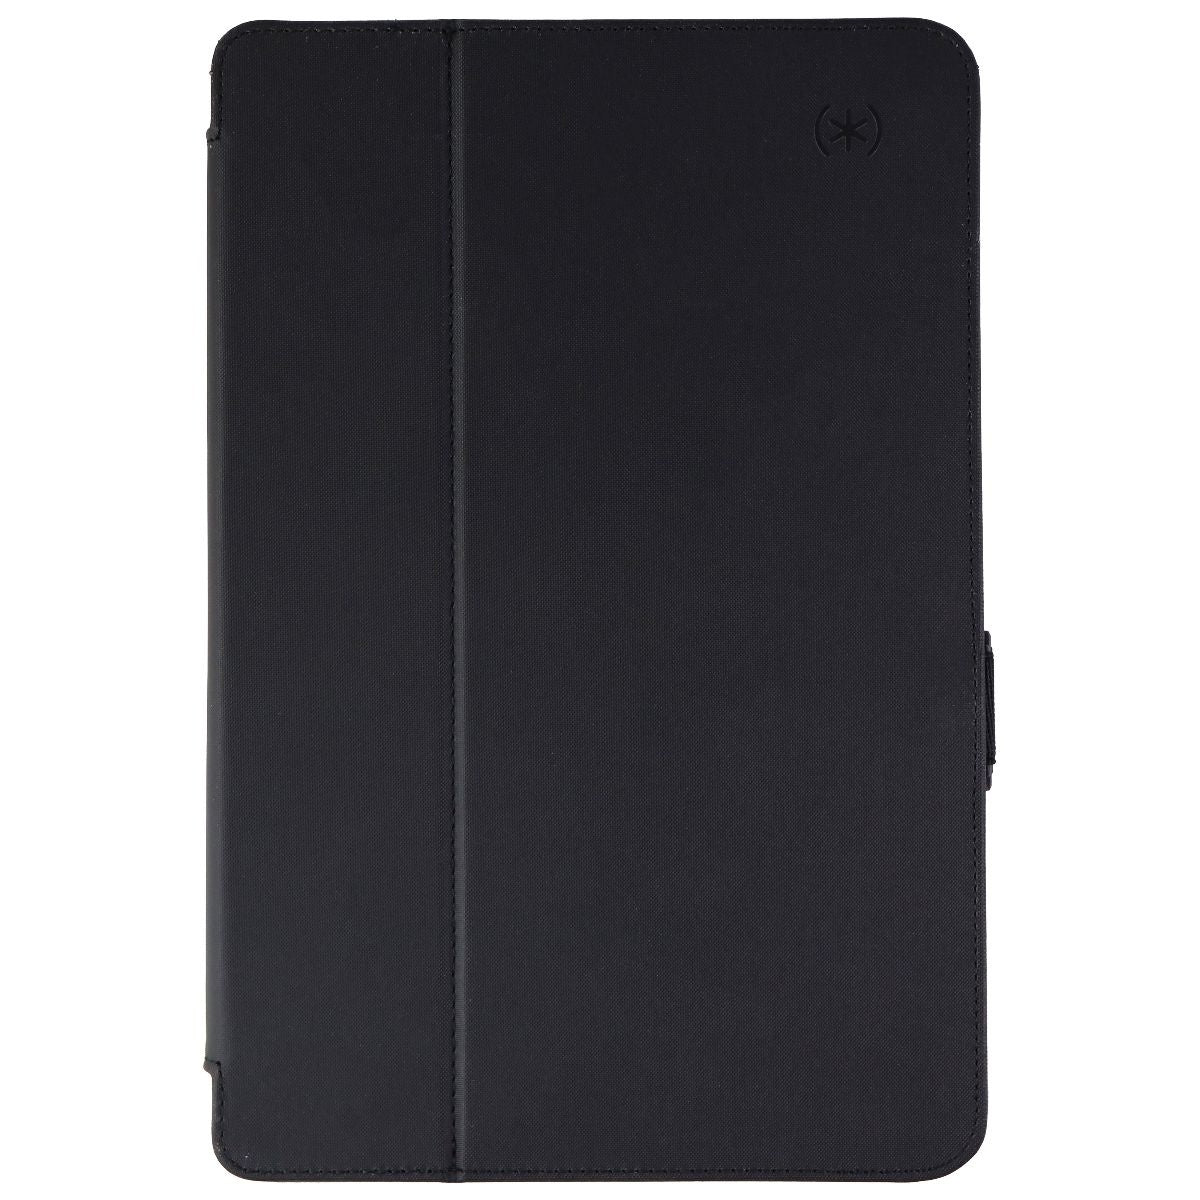 Speck Balance Folio Series Hard Case for Samsung Galaxy Tab S6 - Black iPad/Tablet Accessories - Cases, Covers, Keyboard Folios Speck    - Simple Cell Bulk Wholesale Pricing - USA Seller